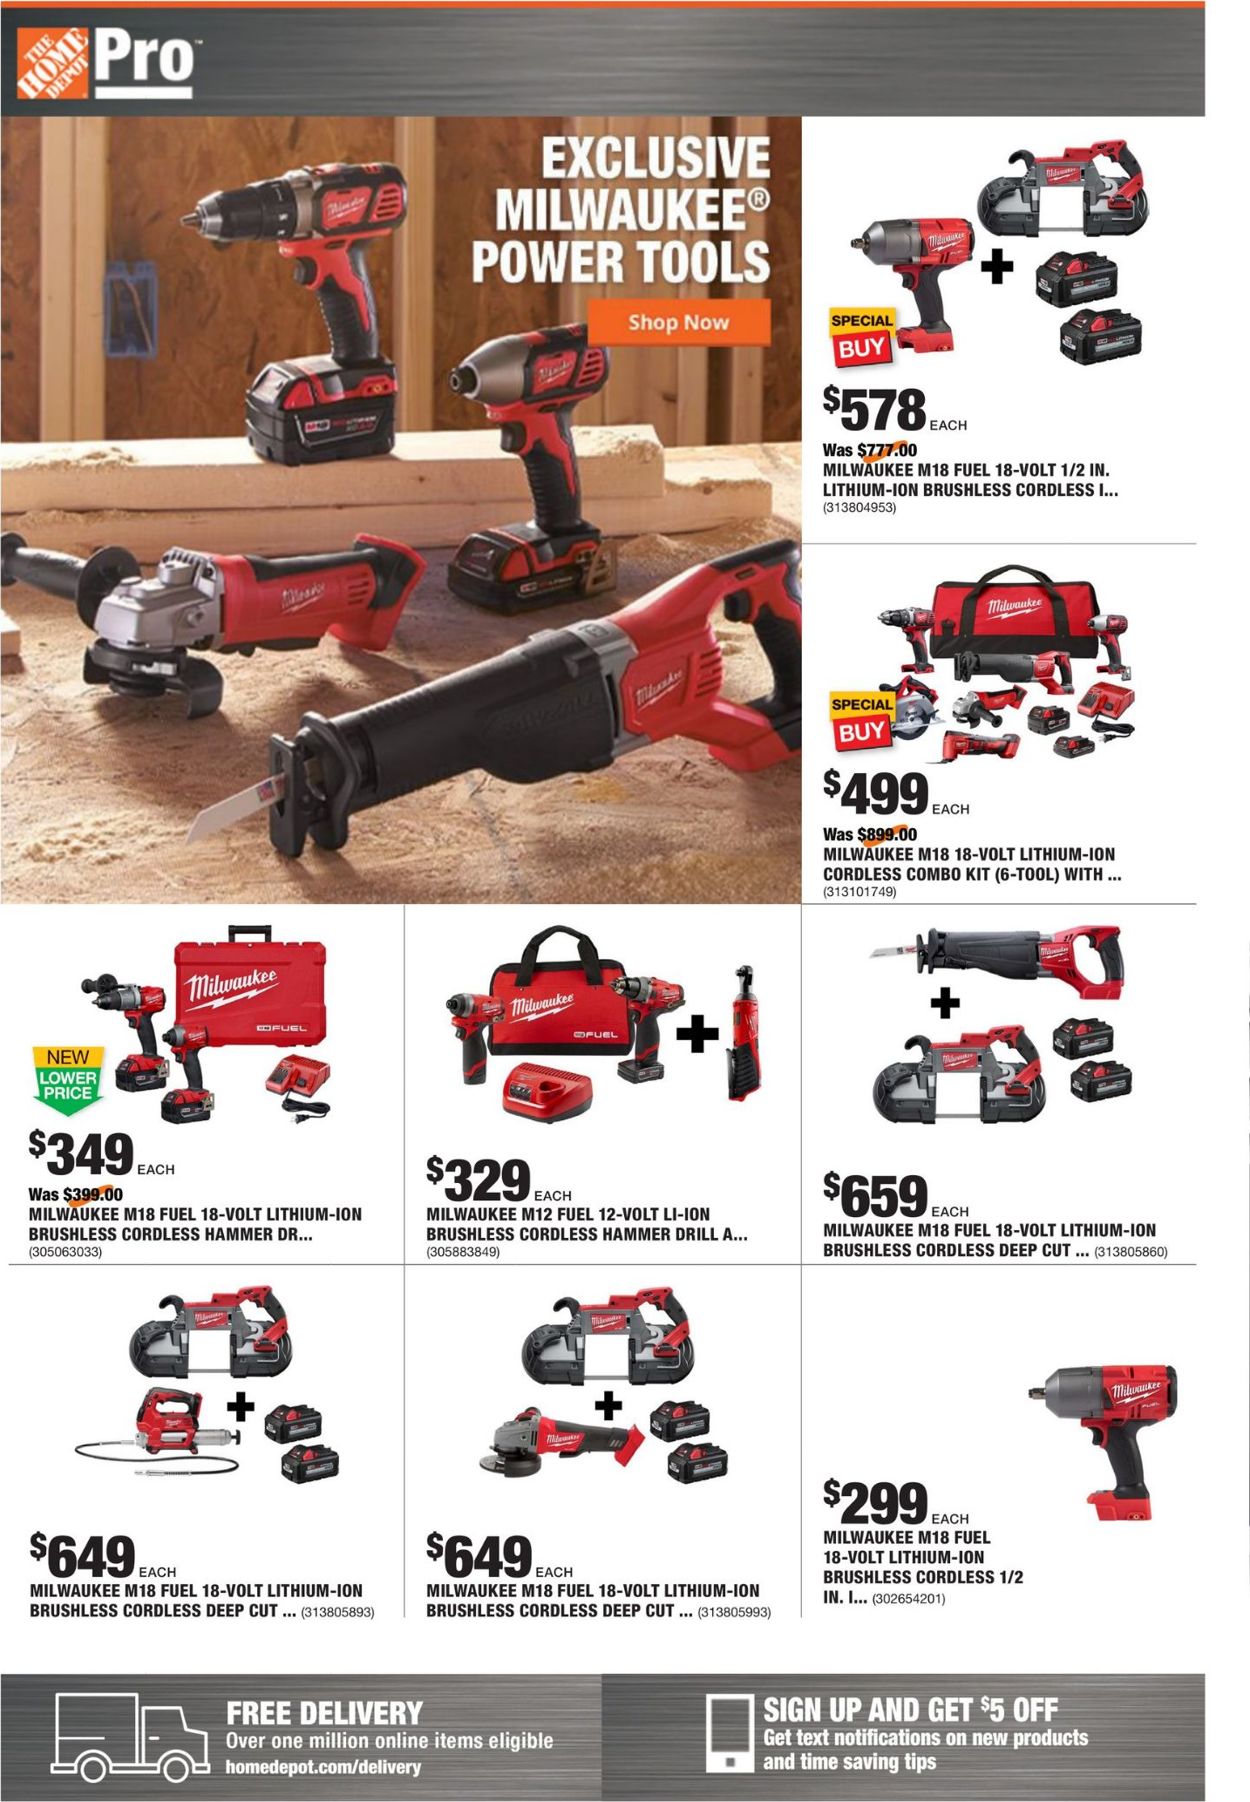 Home Depot Current weekly ad 10/12 10/19/2020 [3]